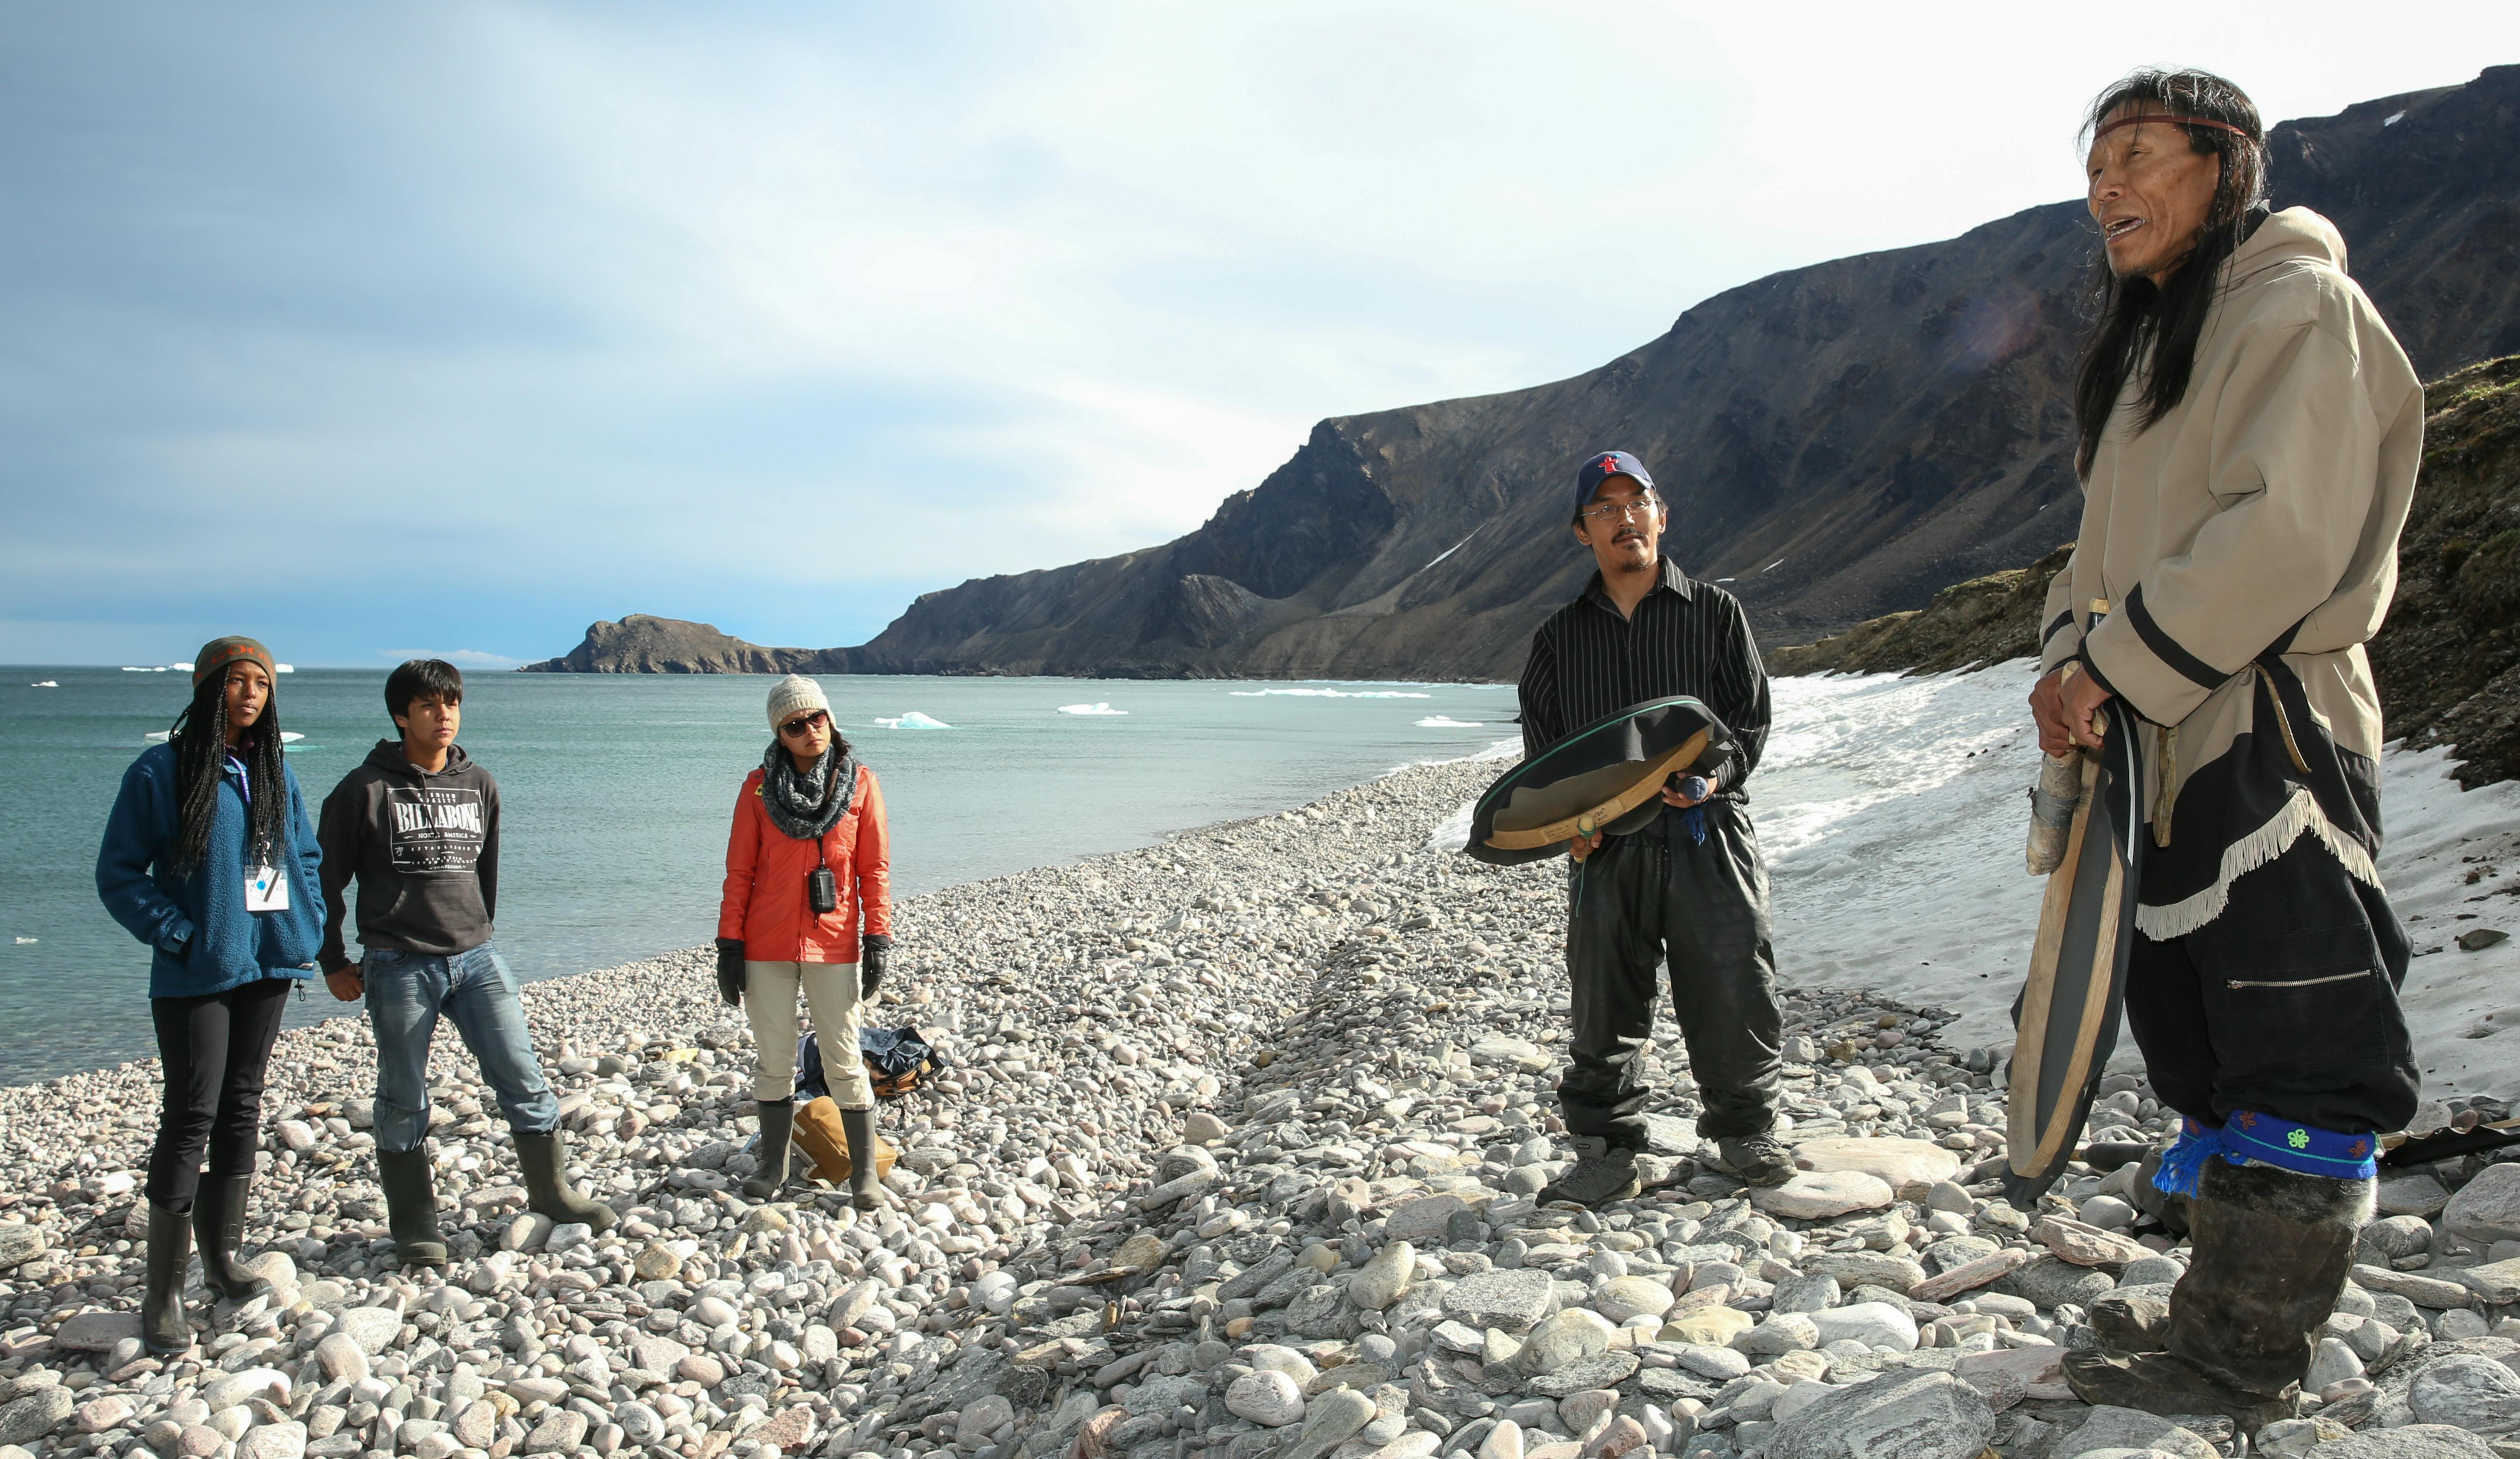 Two Inuit drummers share stories with visitors along the shore of Tallurutiup Imanga National Marine Conservation Area